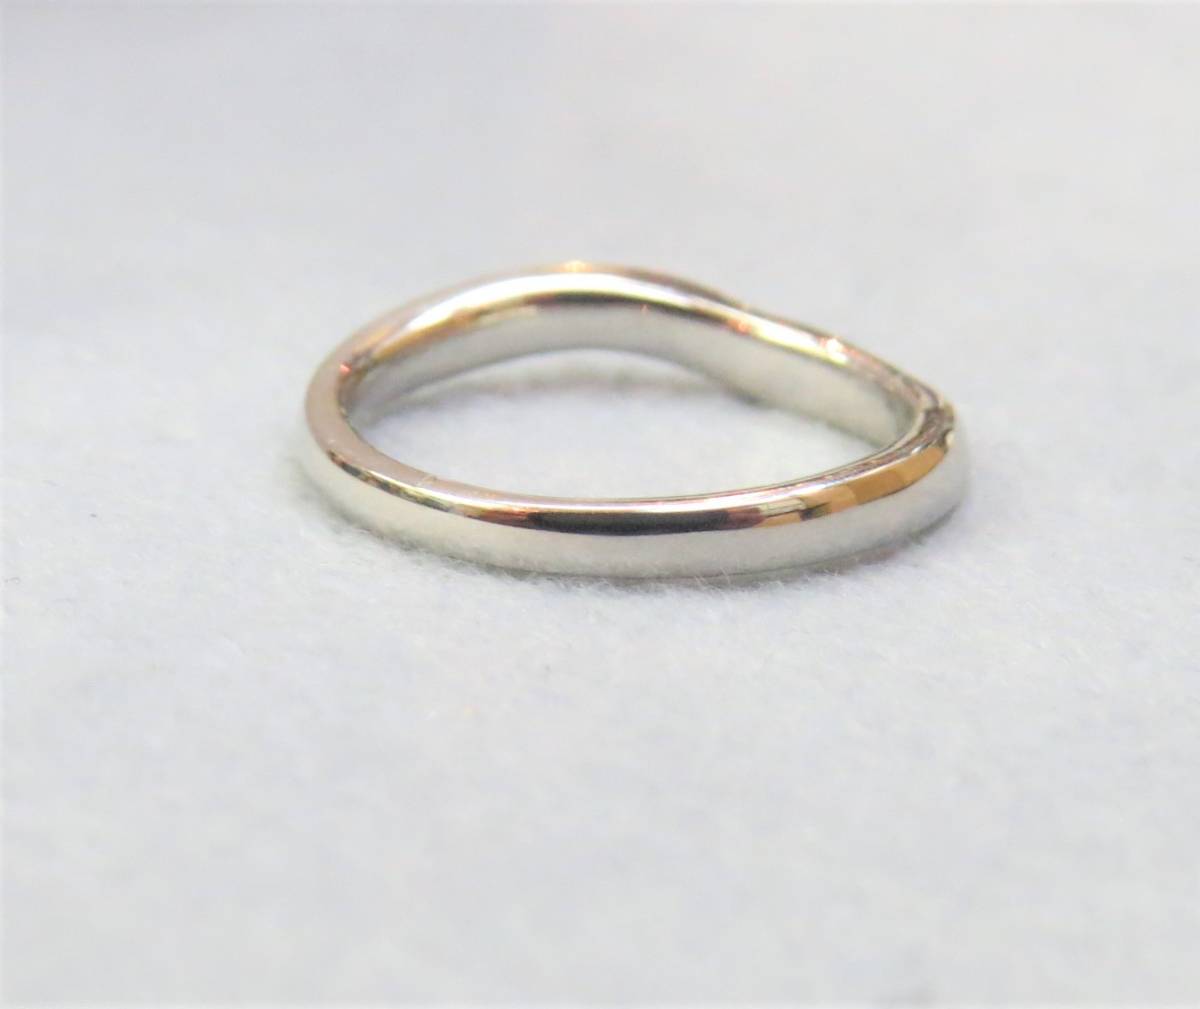  wedding ring [4*C][Pt950] consumption tax & postage included * natural diamond *3.2g* new goods 